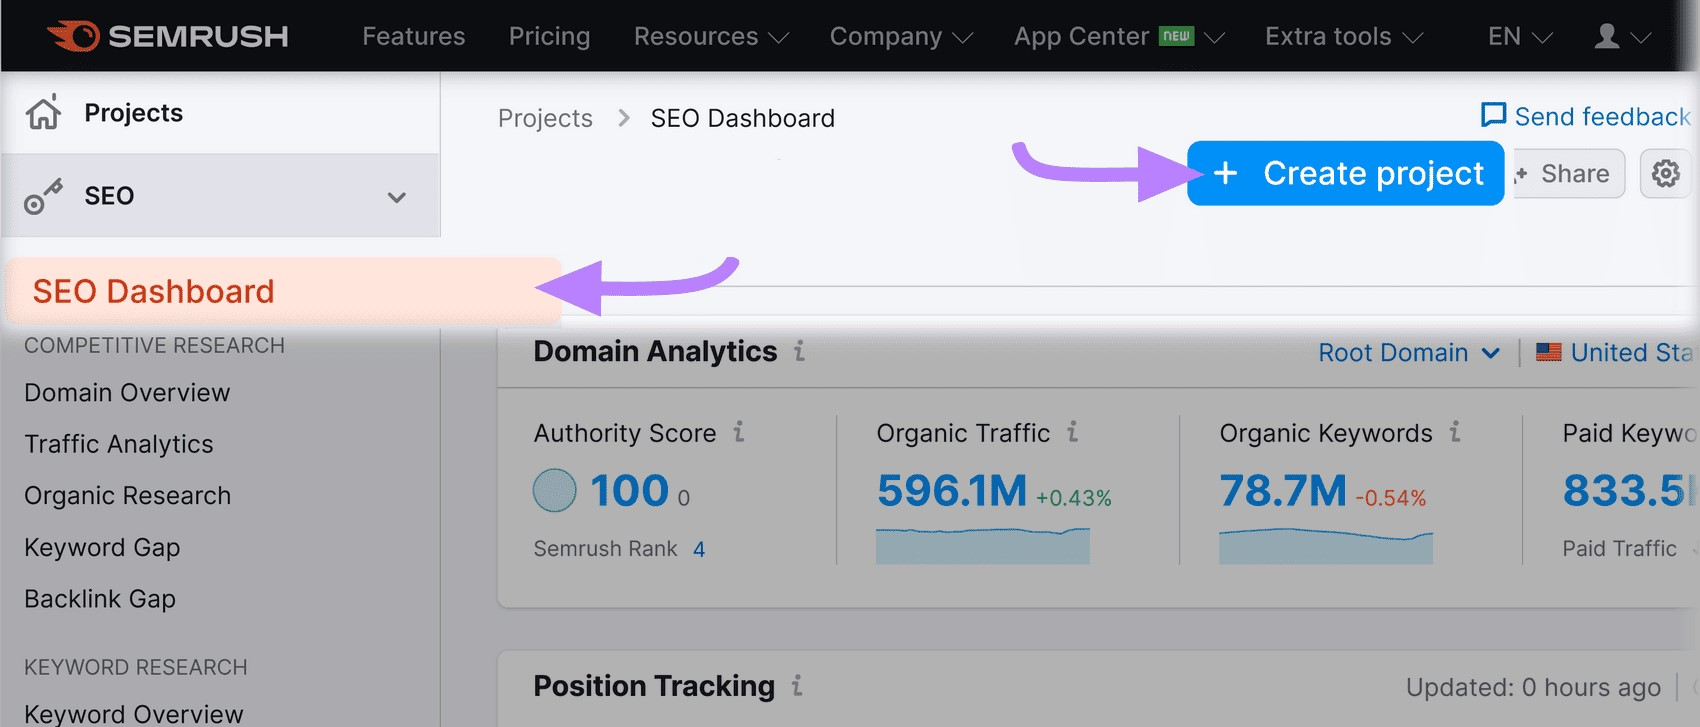 “SEO Dashboard” selected in the left-hand menu